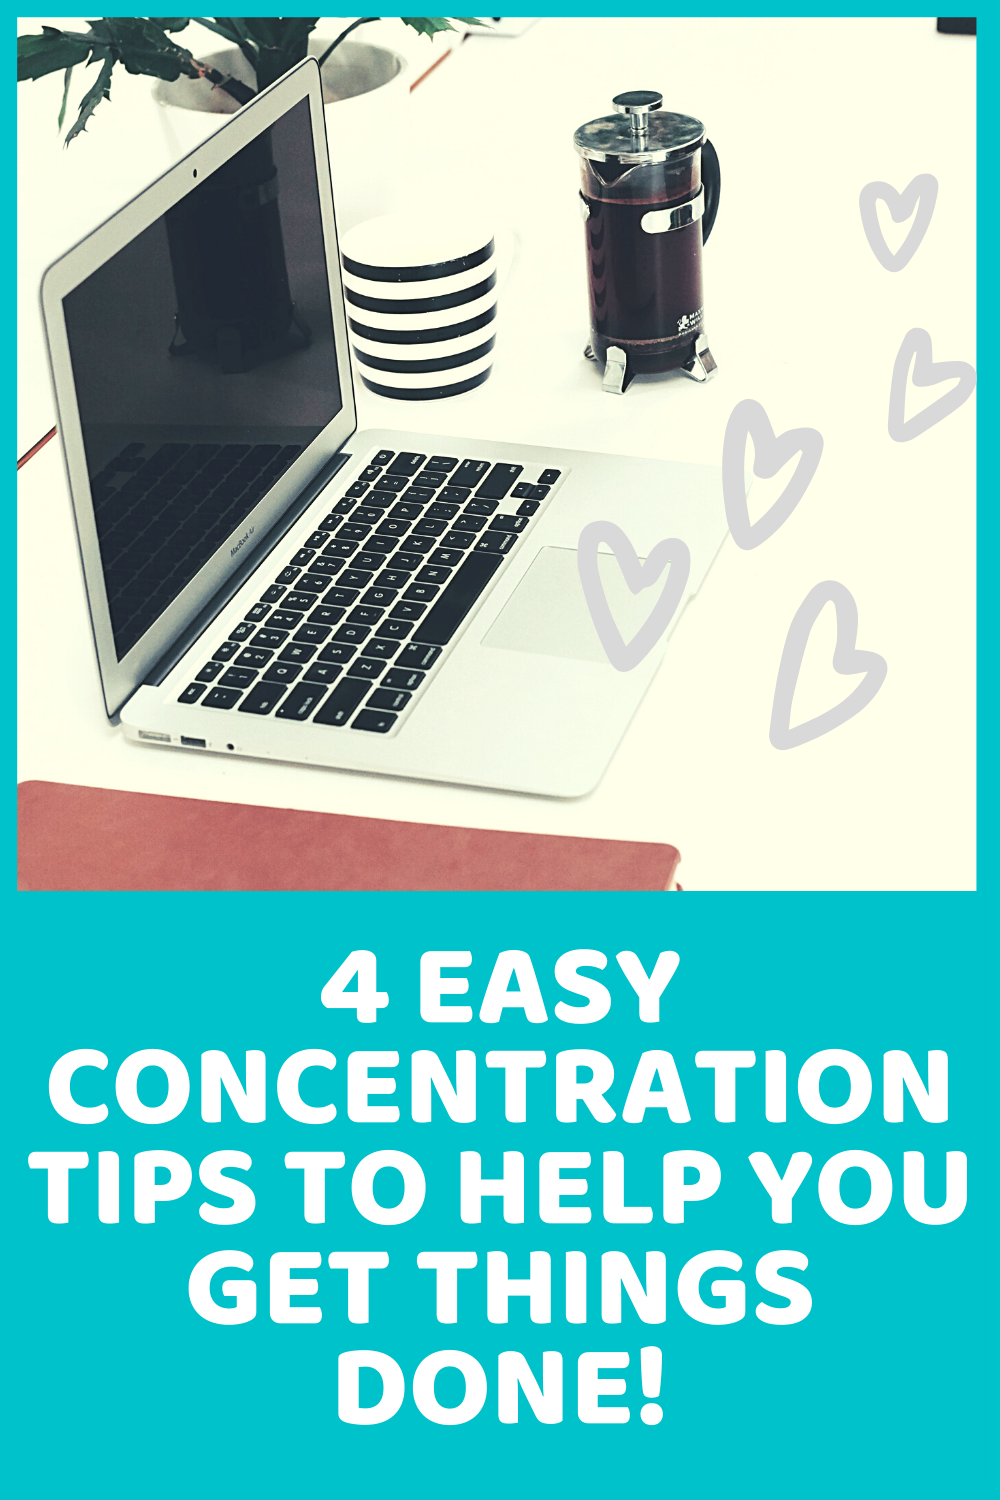 4 Easy Concentration Tips To Help You Get Things Done!